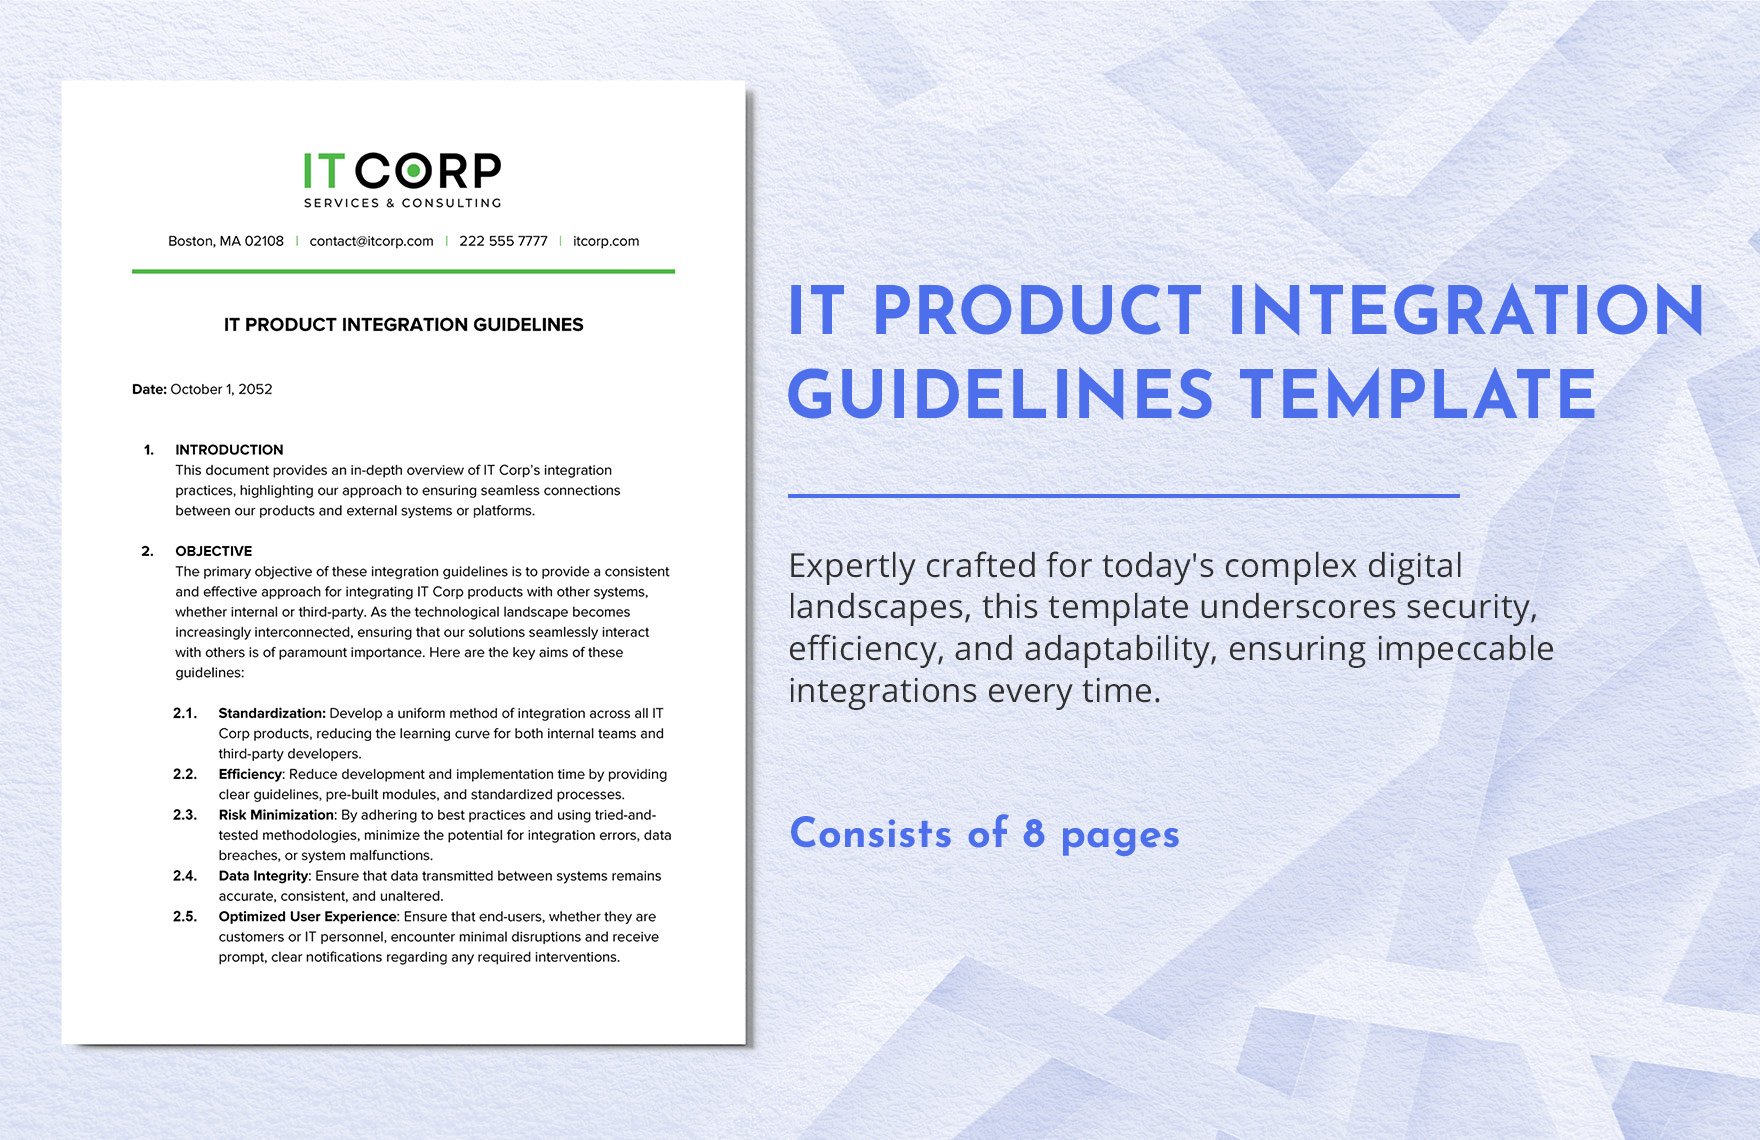 IT Product Integration Guidelines Template